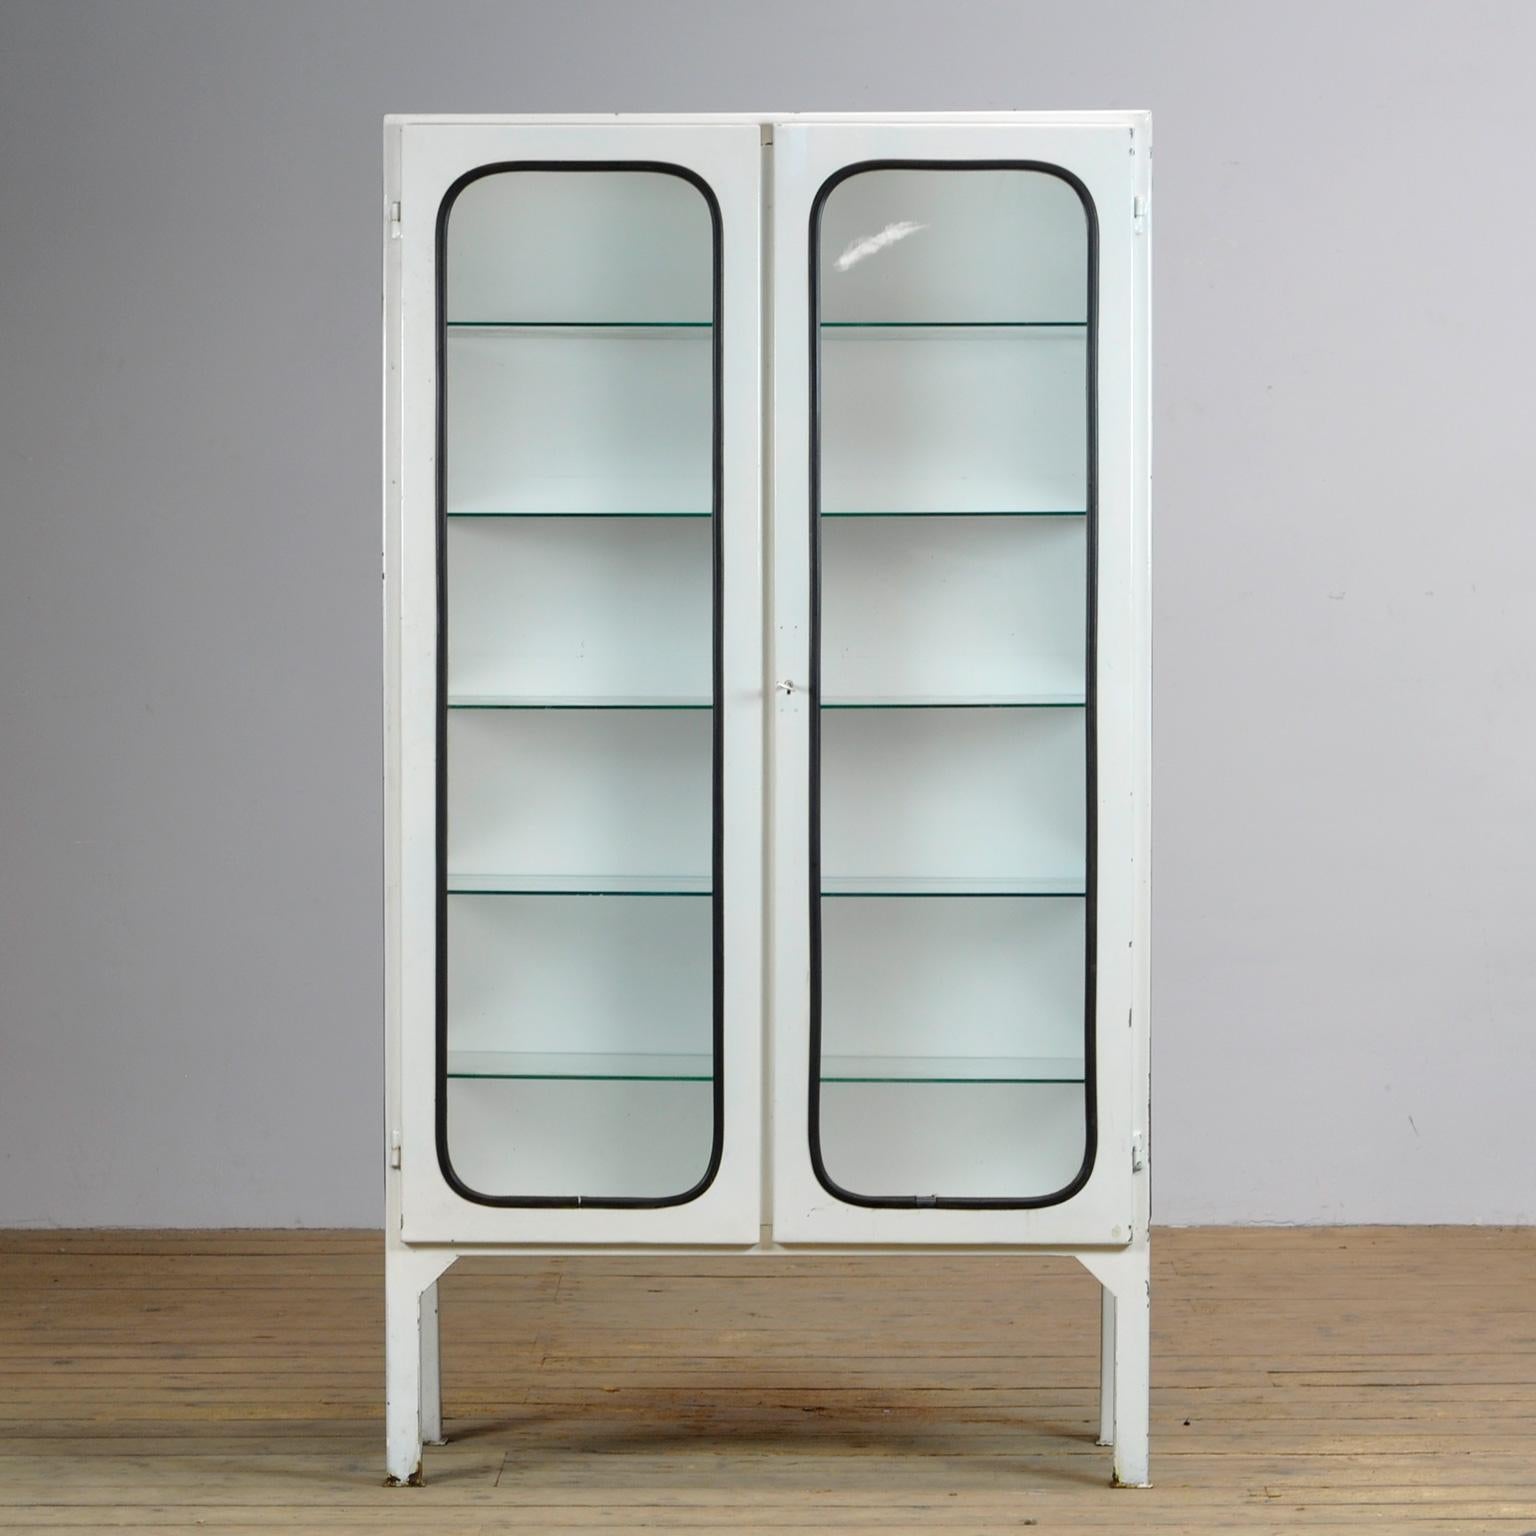 This medicine cabinet was designed in the 1970s and was produced circa 1975 in hungary. It is made from iron and glass, and the glass is held by a black rubber strip. The cabinet features five adjustable glass shelves and a functioning lock.